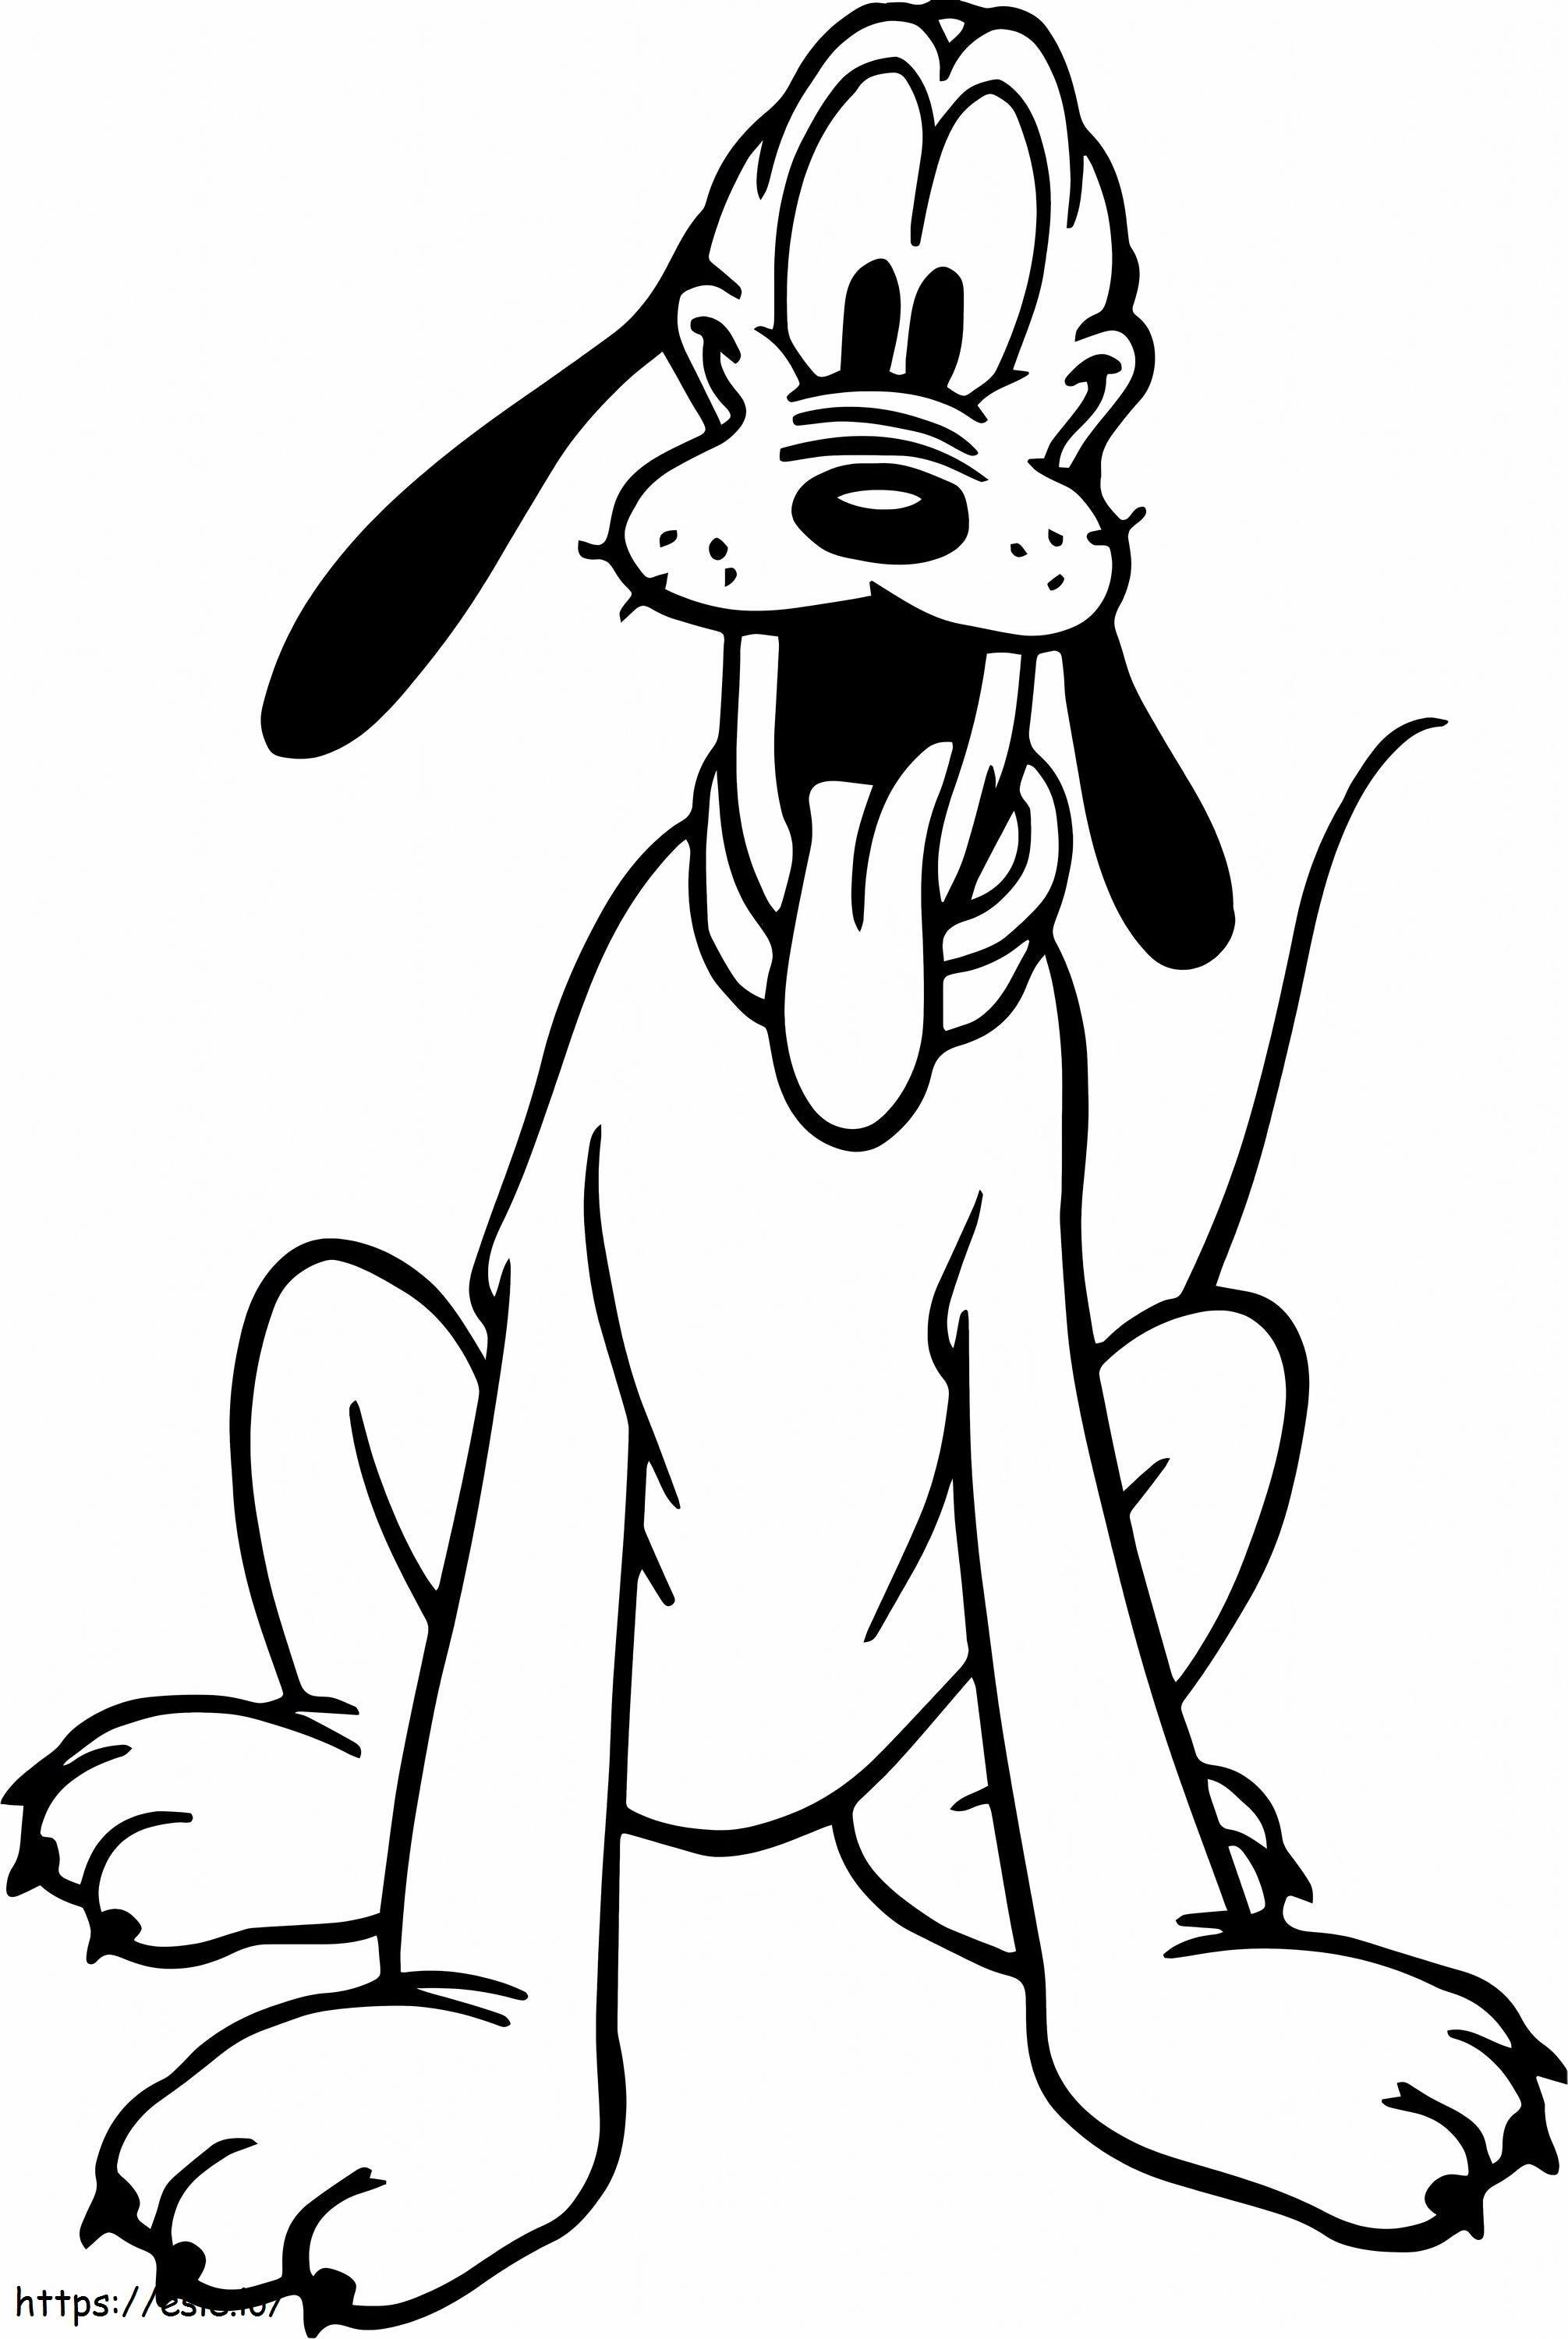 Basic Pluto coloring page